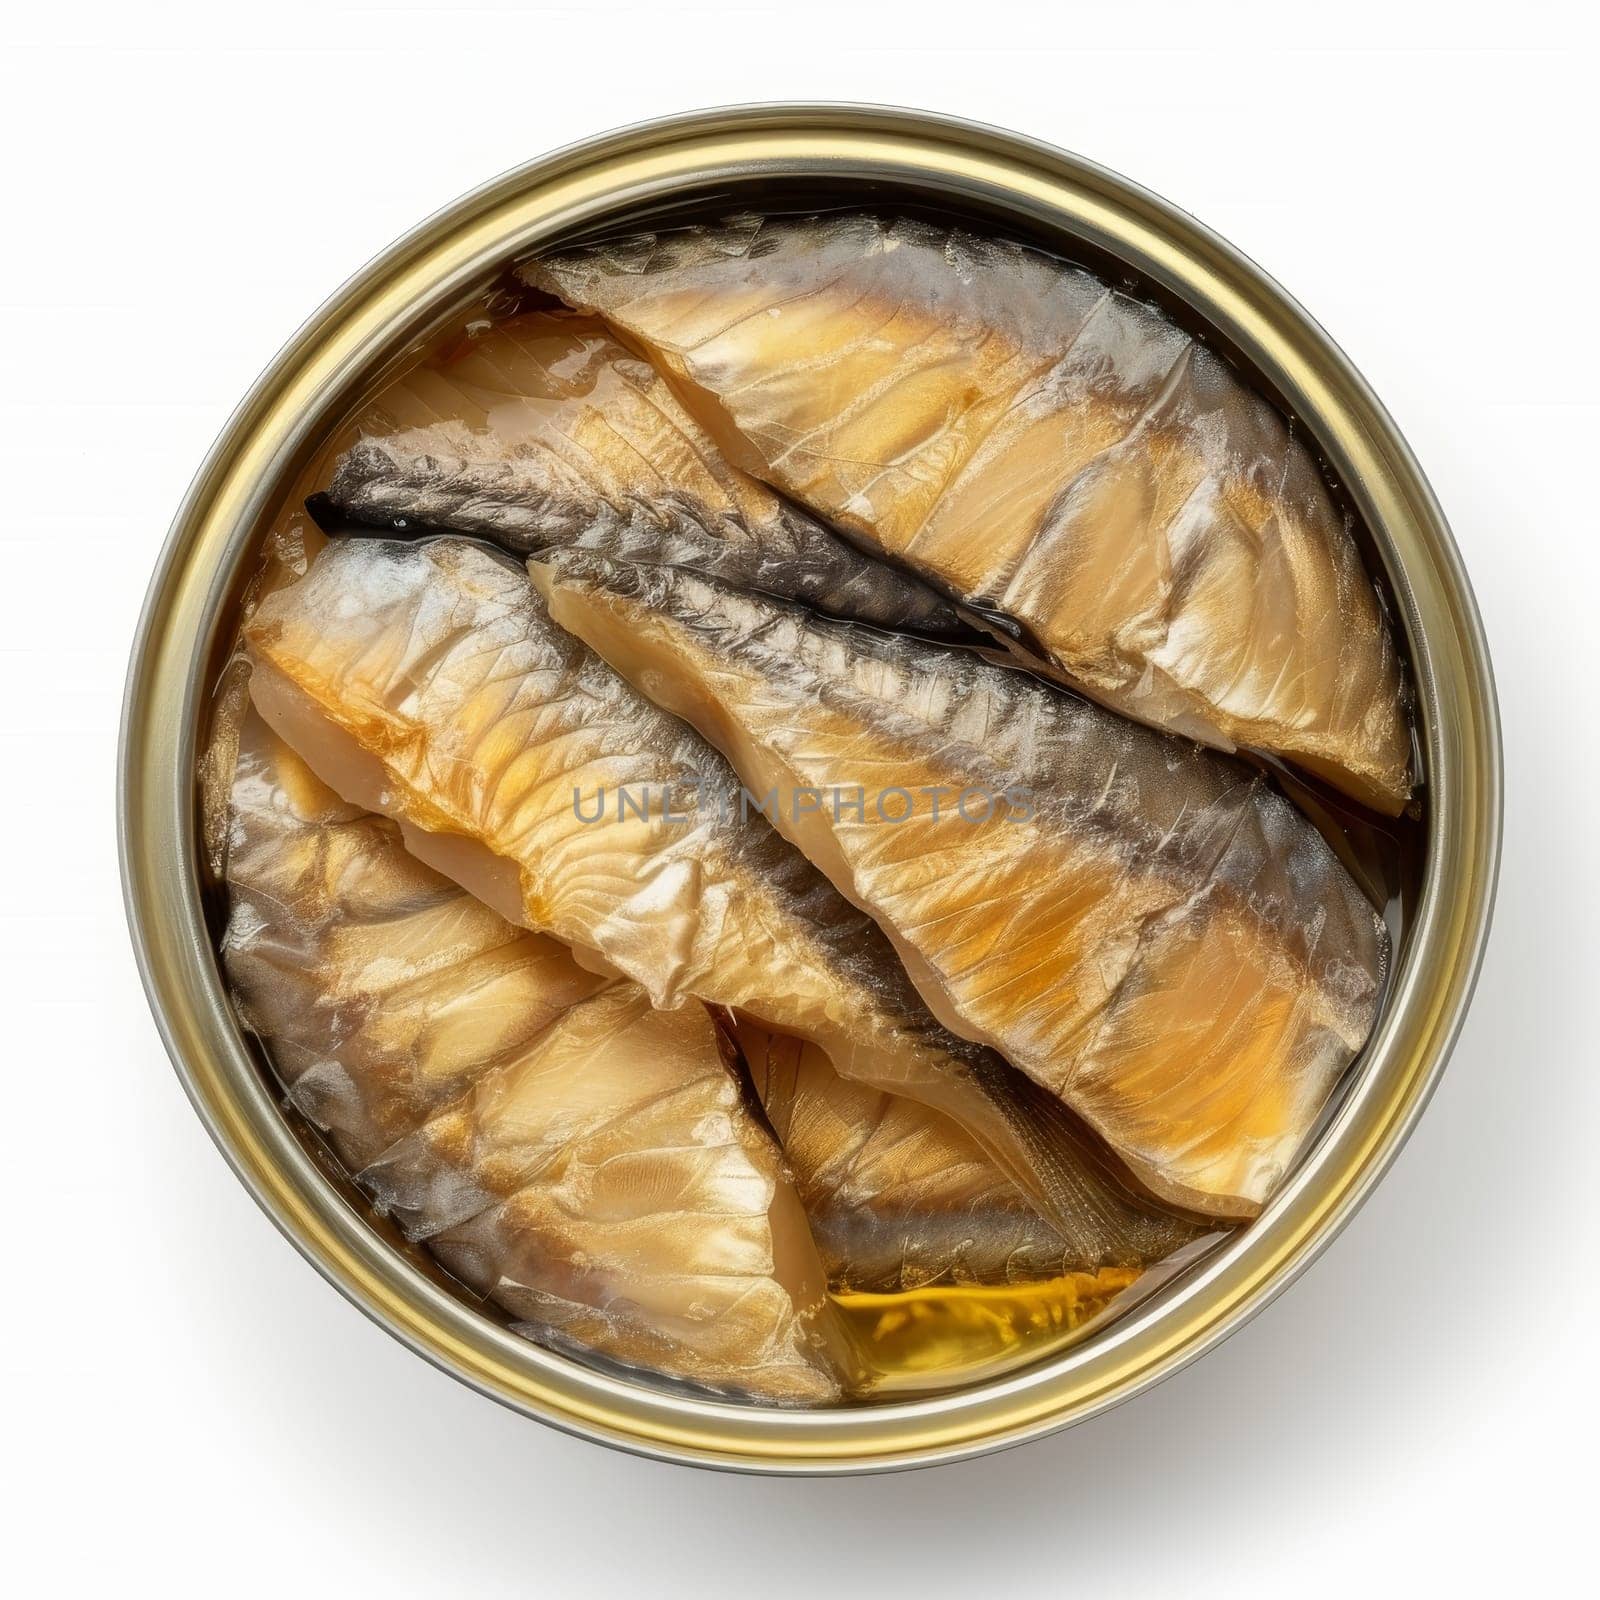 Overhead view of canned fish fillets immersed in oil, captured against a white backdrop.. by sfinks